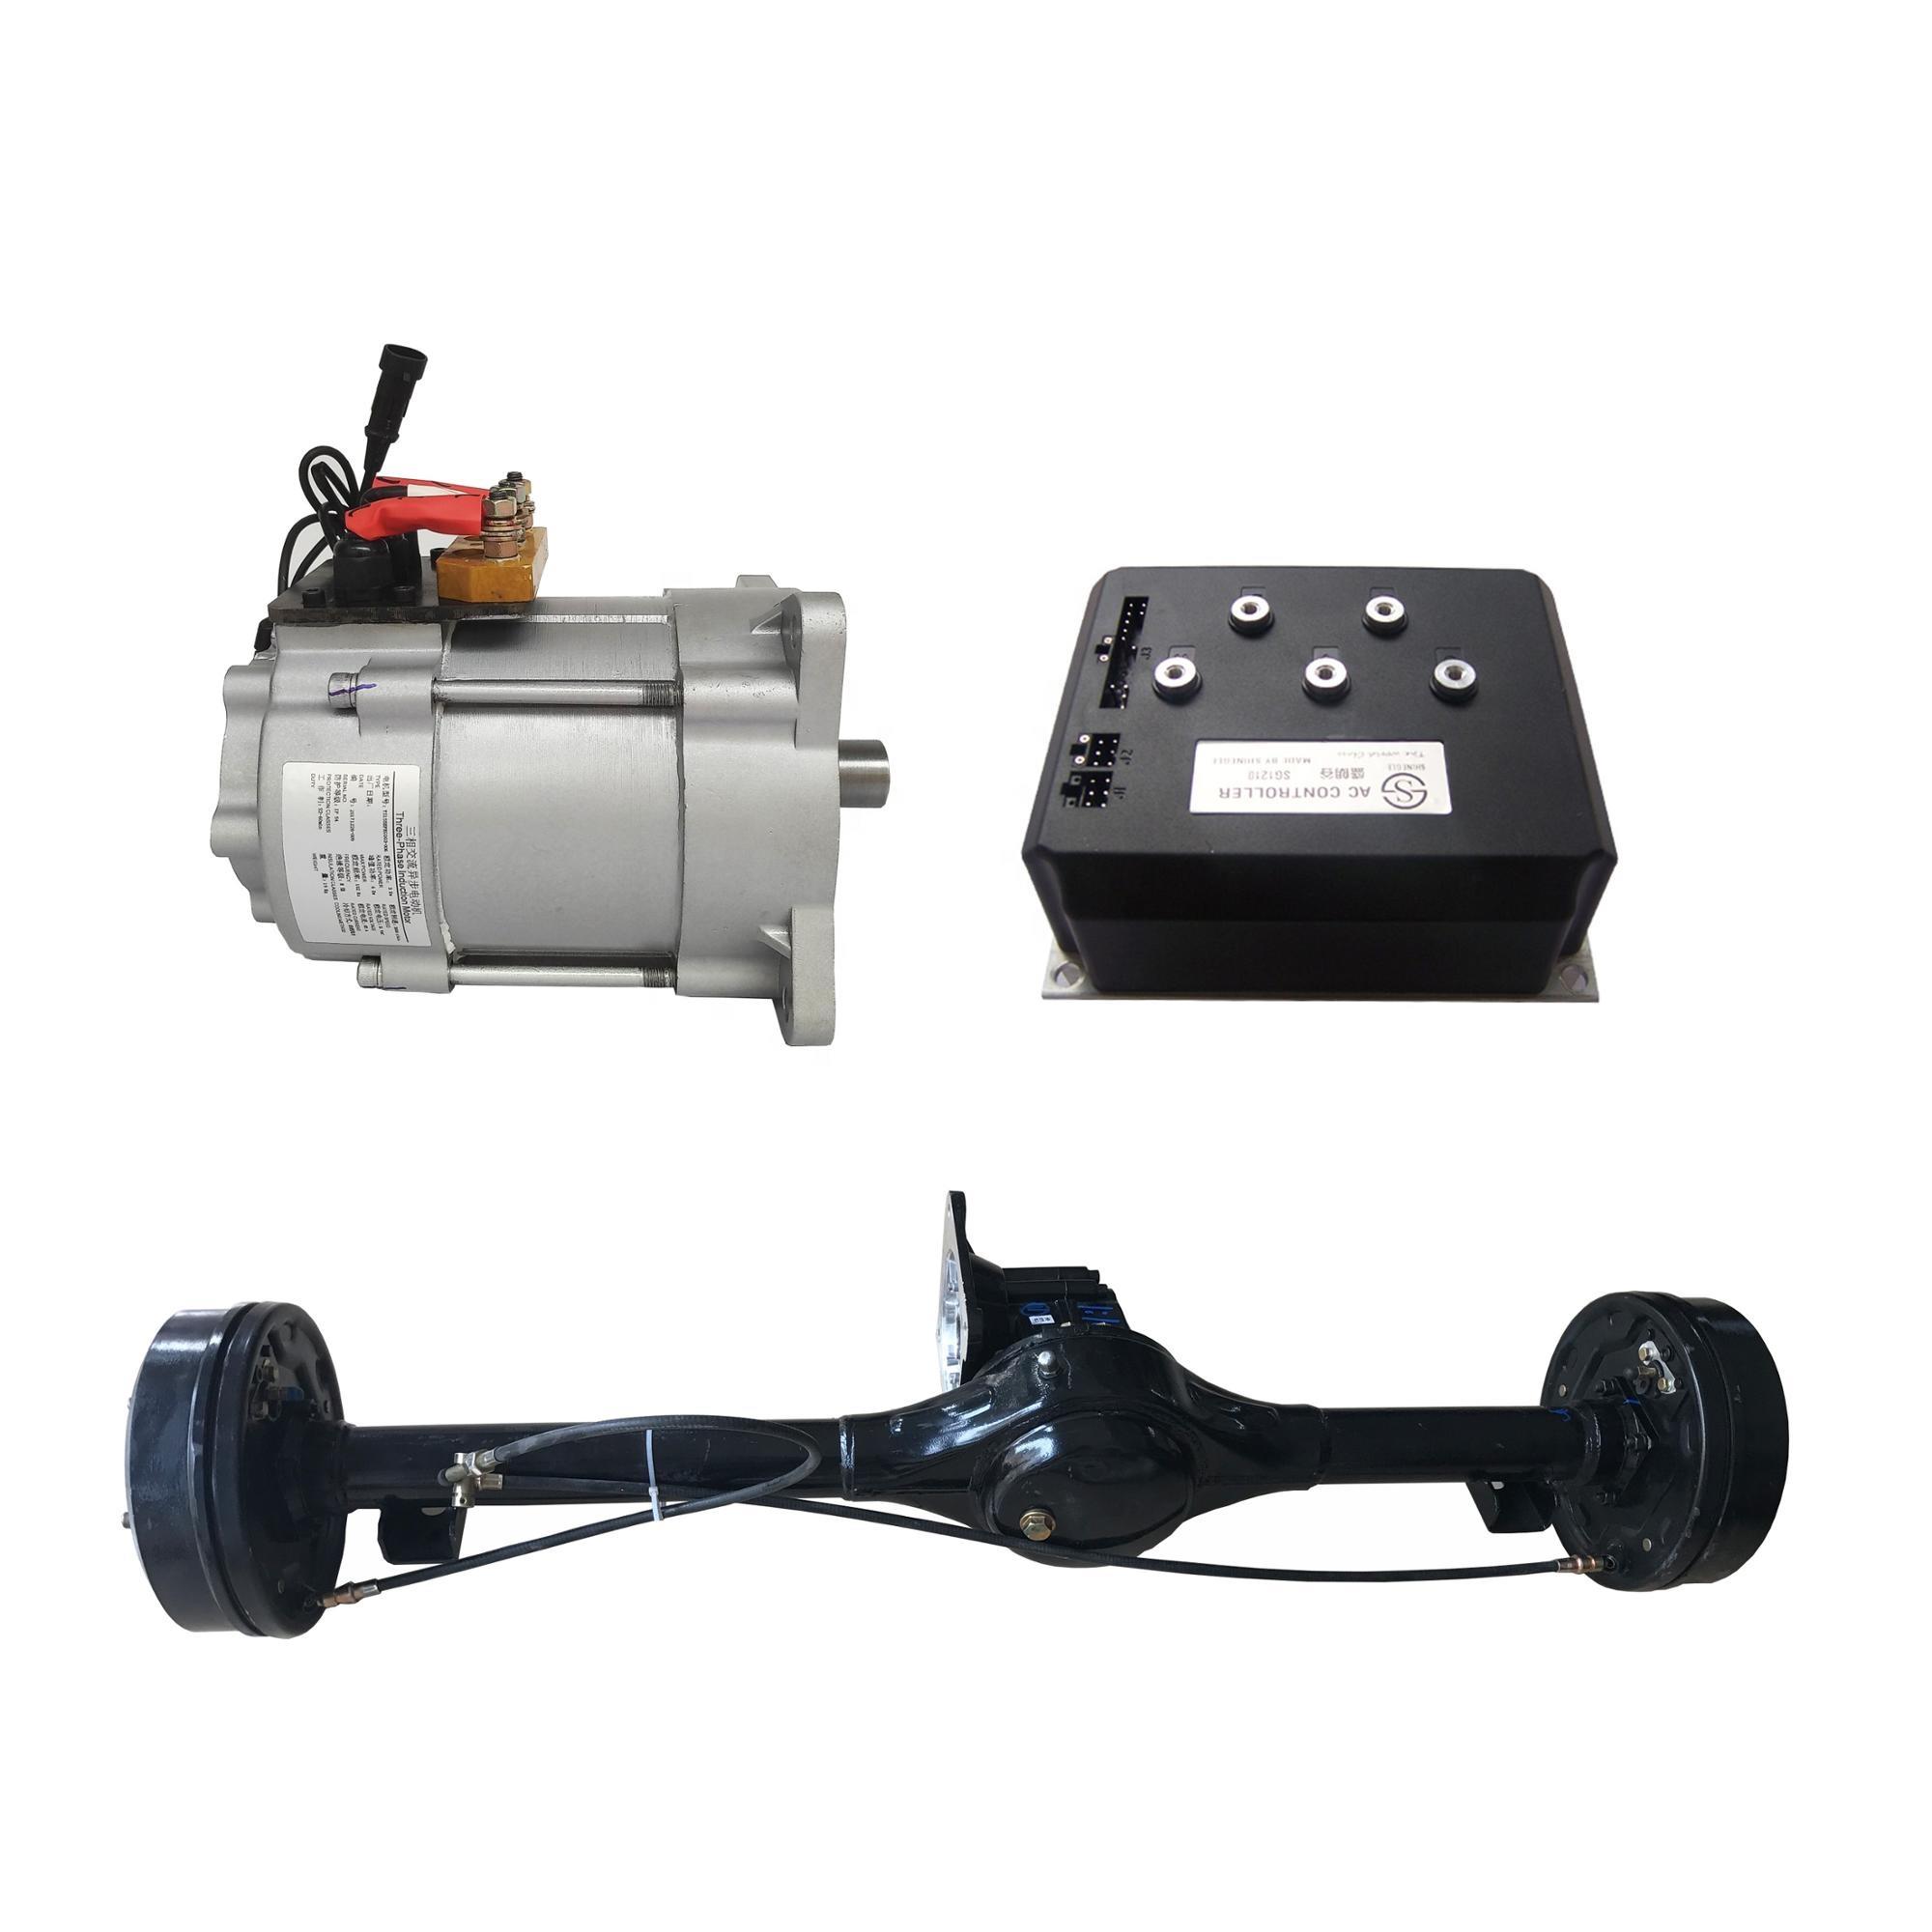 ev car conversion kit/Low Price High Quality 5000 watt Hub Motor for electric car spare parts the electric motor Featured Image